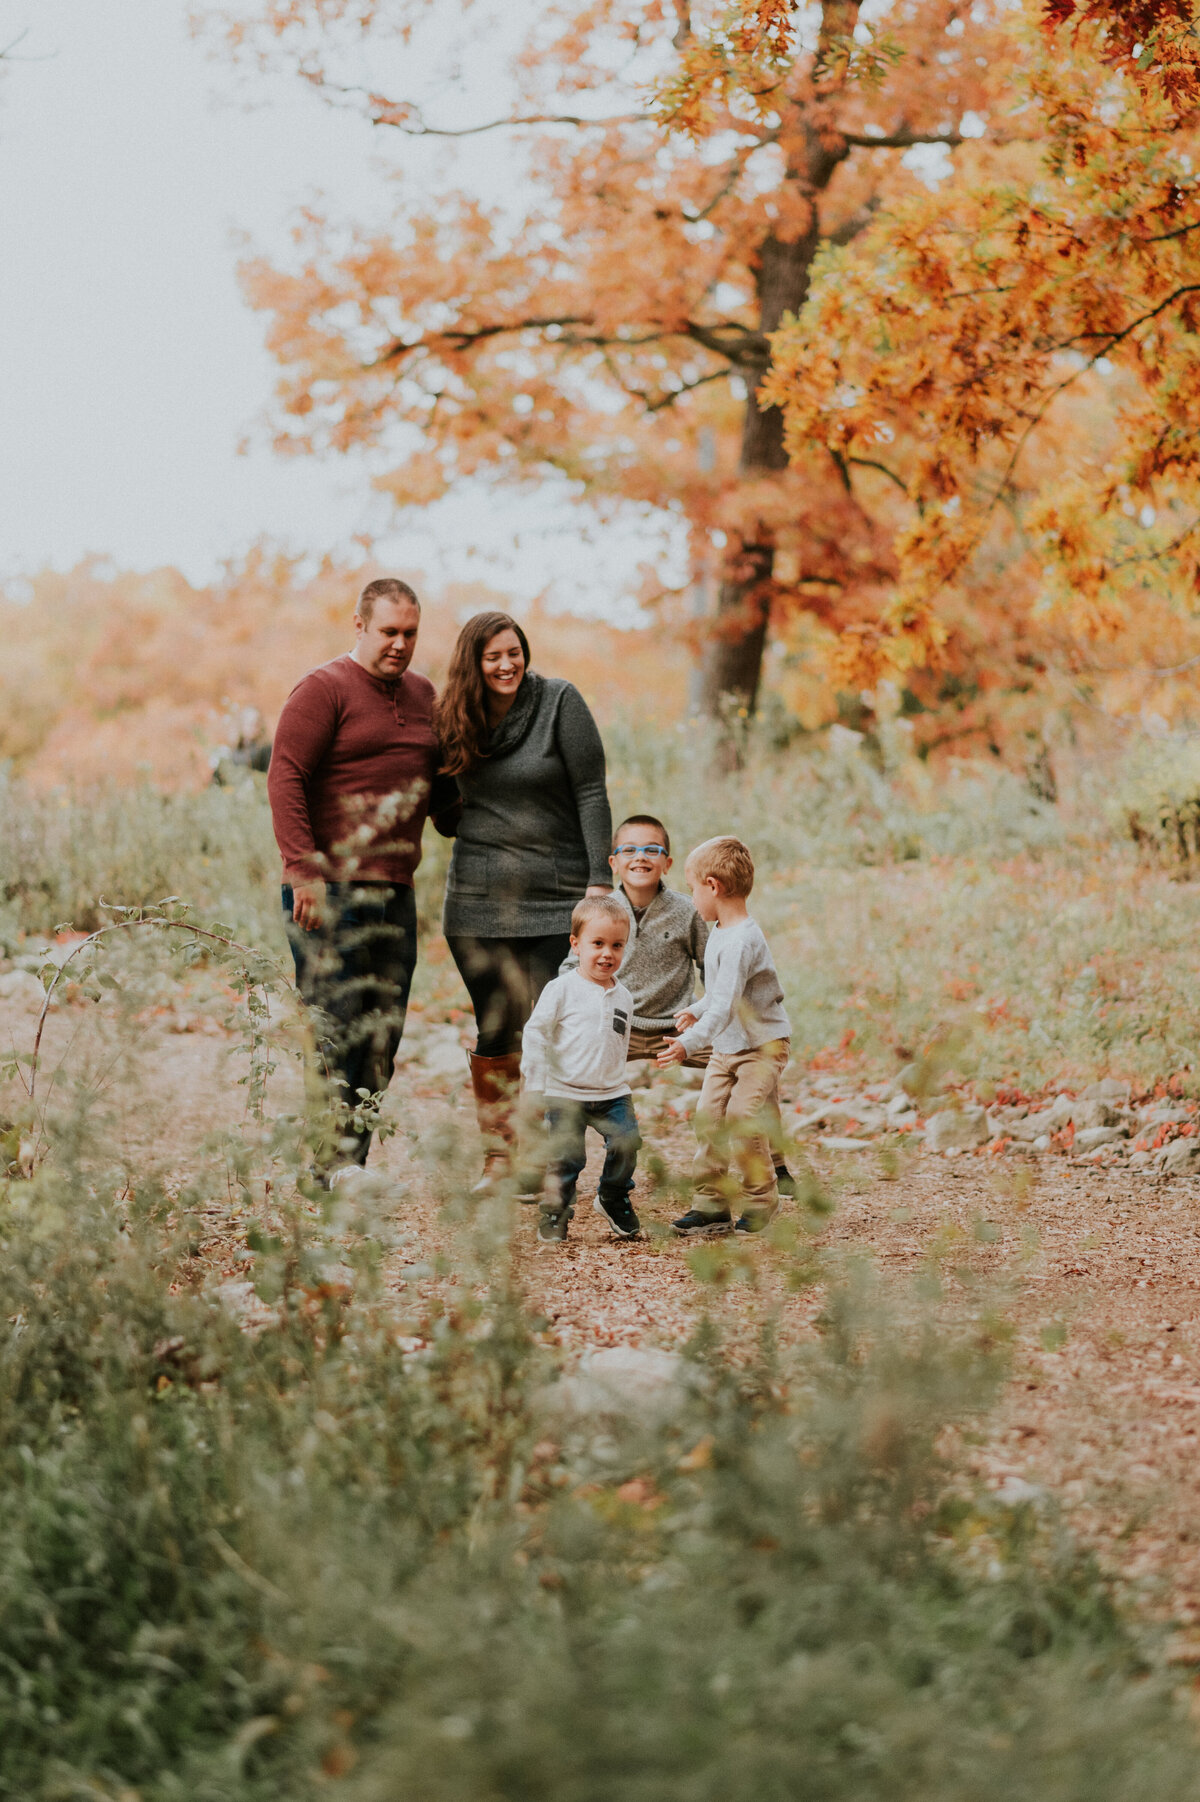 Embrace the beauty of nature in Minneapolis family photography. Shannon Kathleen Photography creates portraits that reflect the harmony of your family. Book your session today!